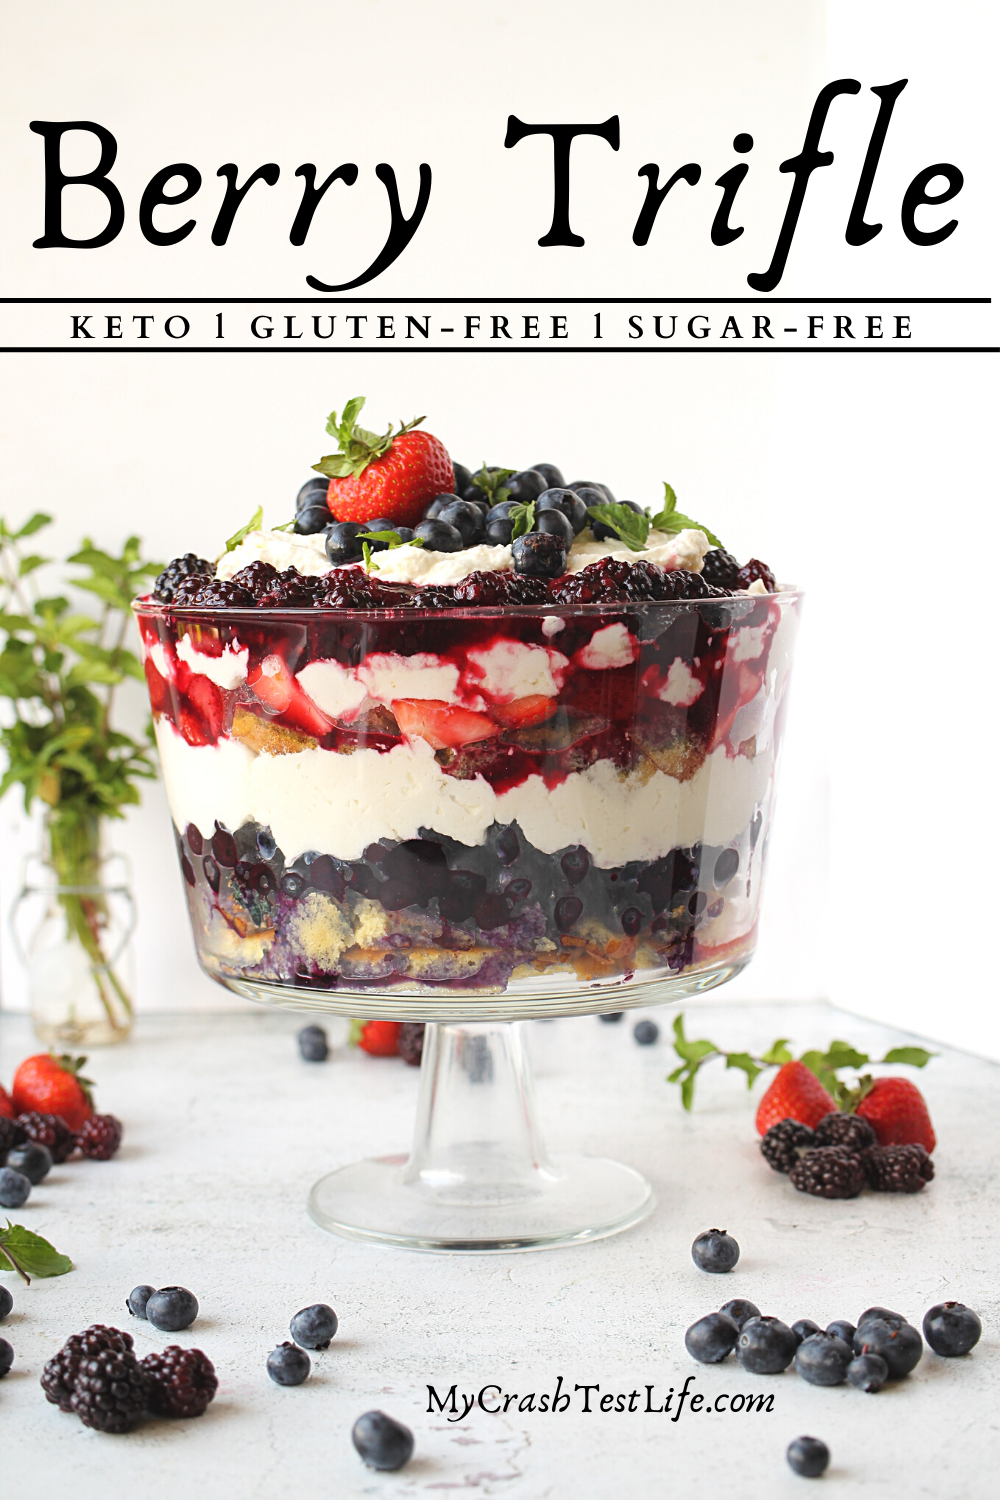 almond sponge cake layered with berries and whipped cream in a trifle bowl